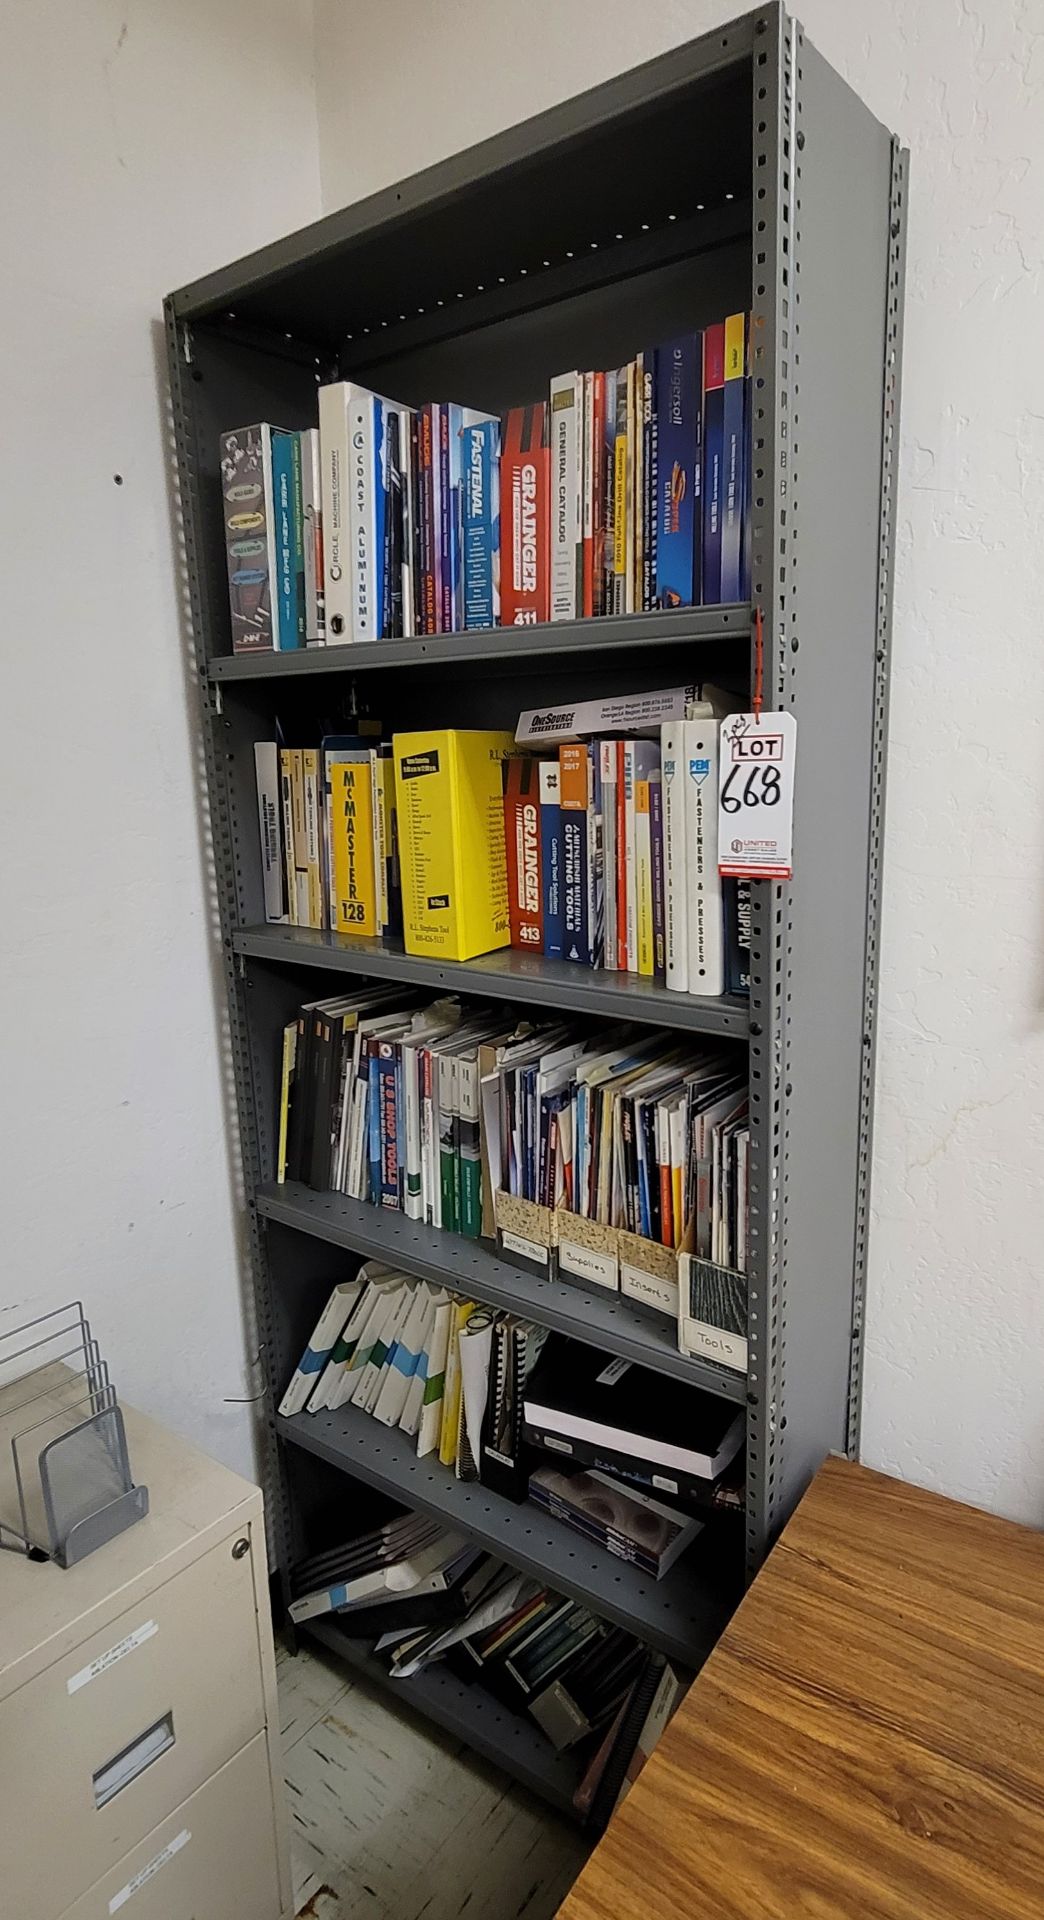 LOT - (2) BOOKSHELVES, 3' X 12" X 87" HT, CONTENTS NOT INCLUDED